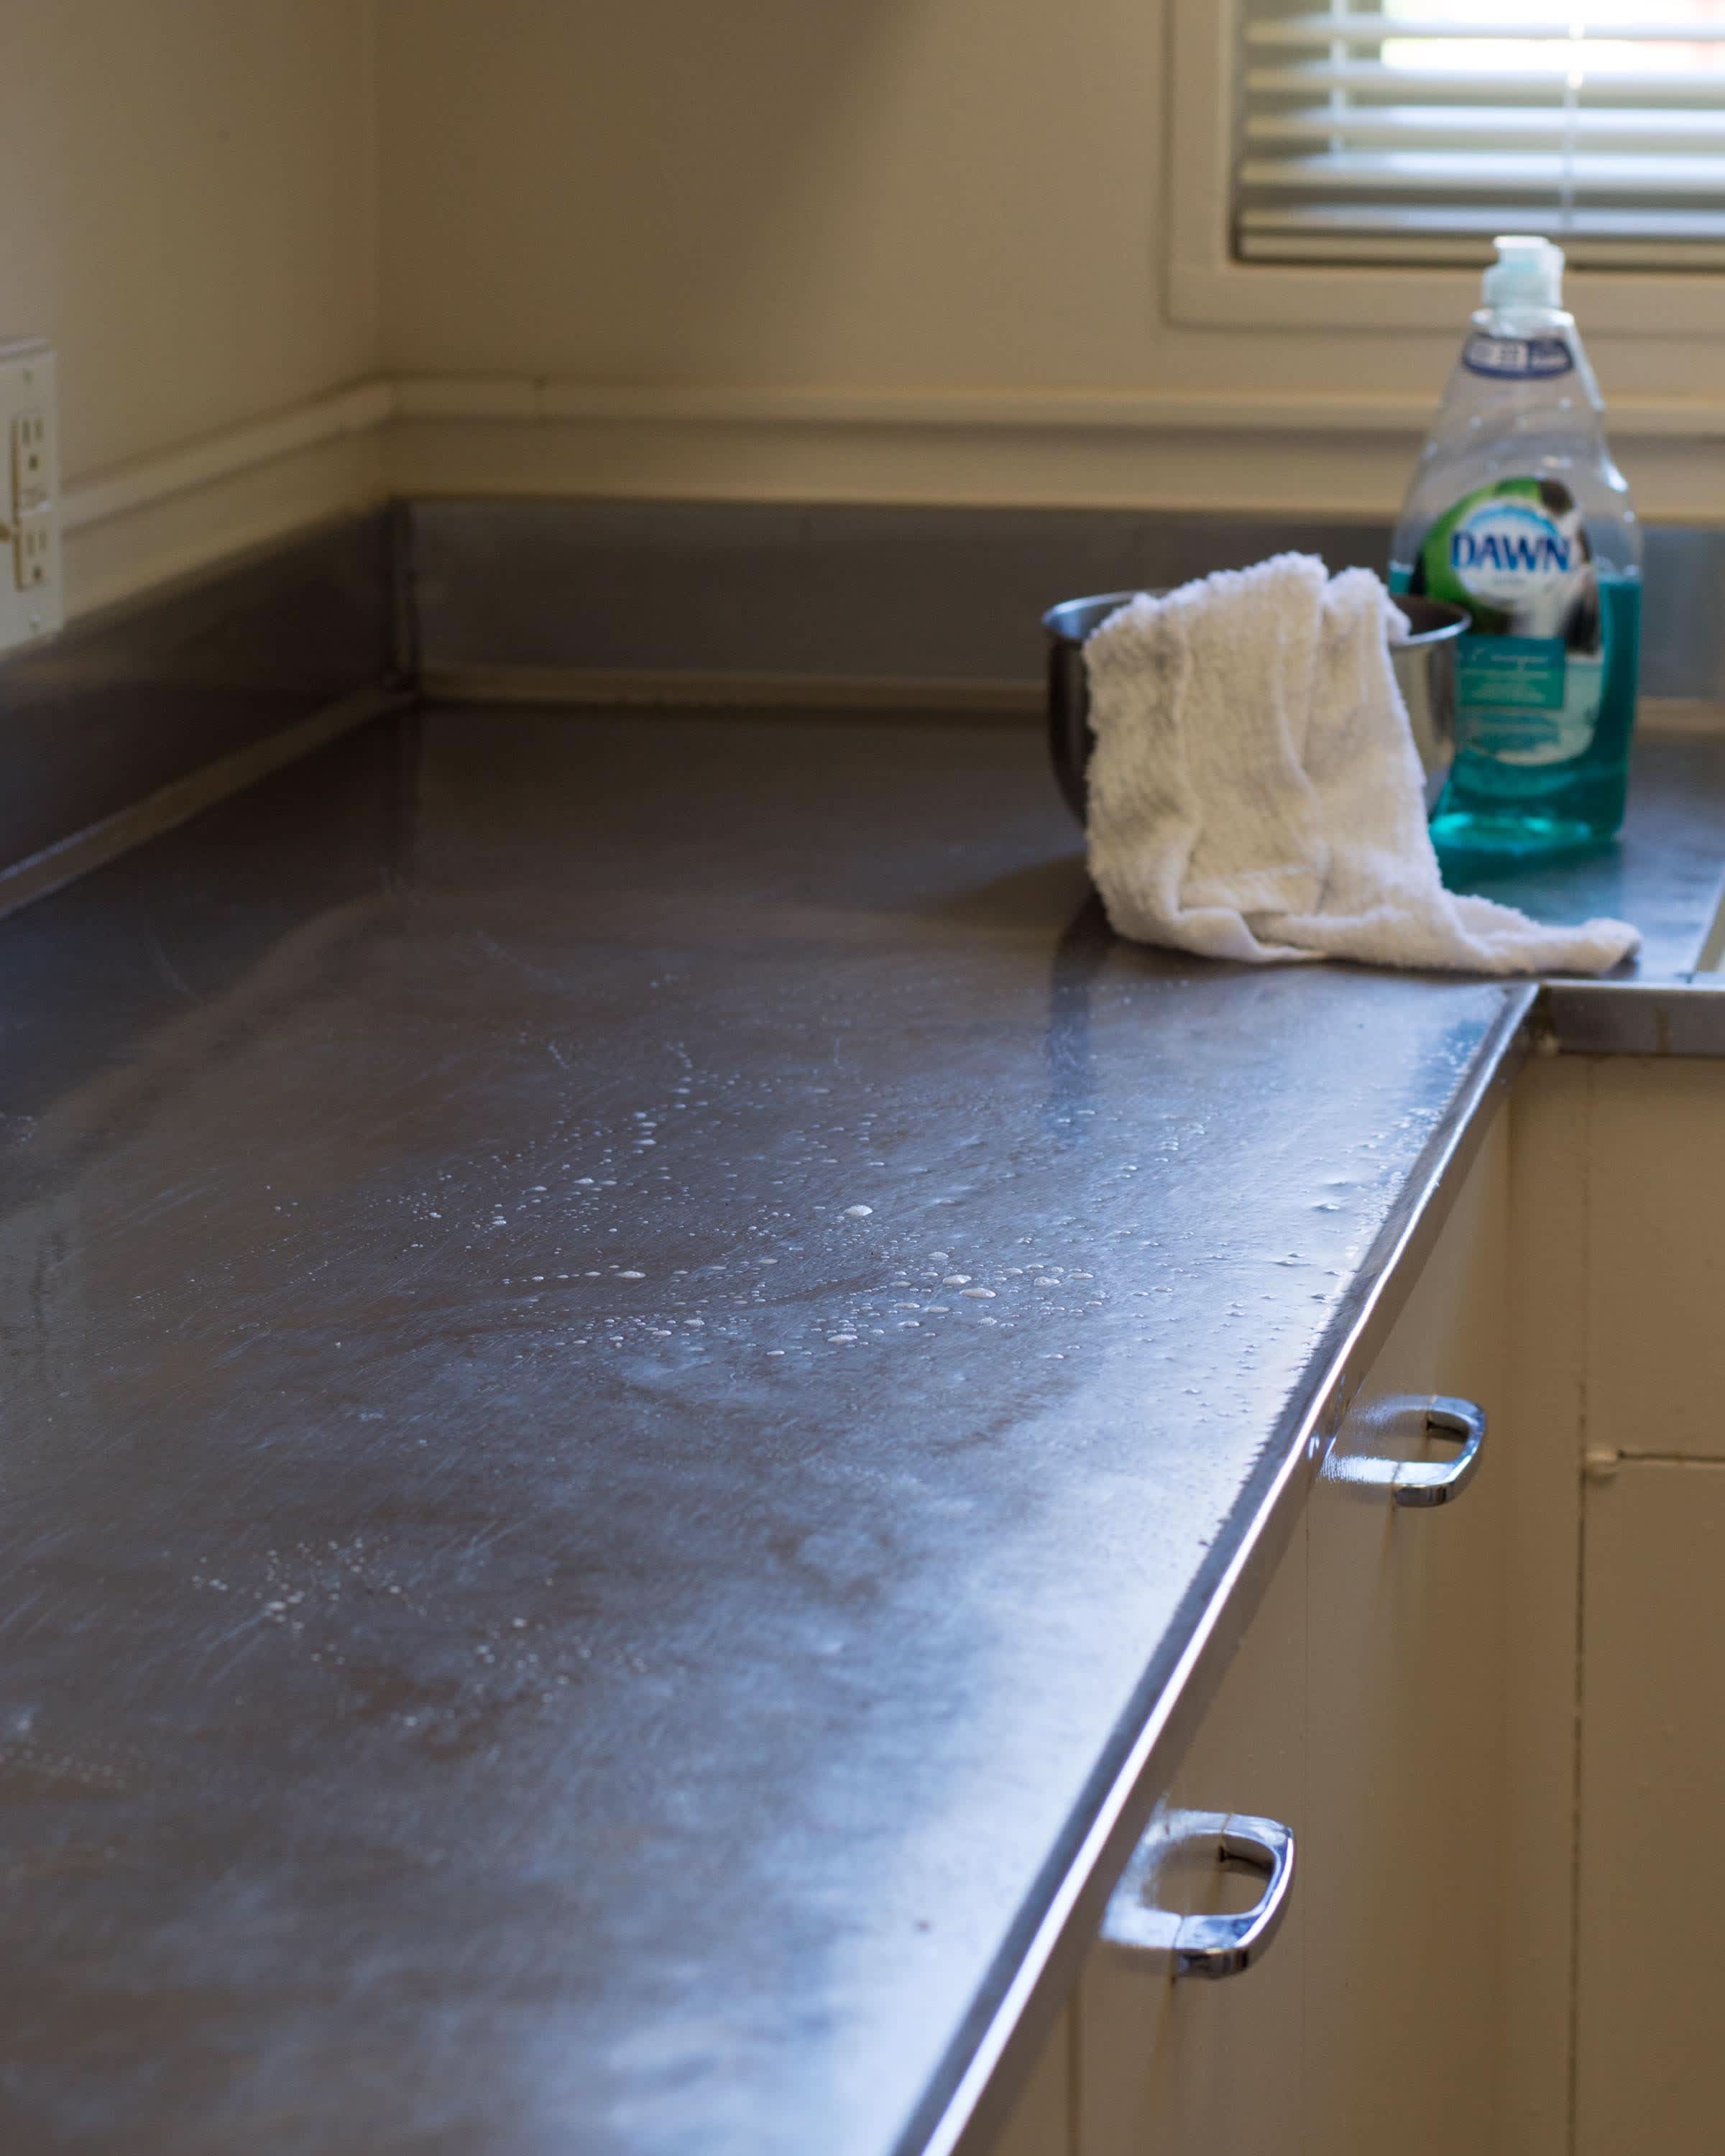 How To Clean Stainless Steel Countertops To A Shiny Streak Free